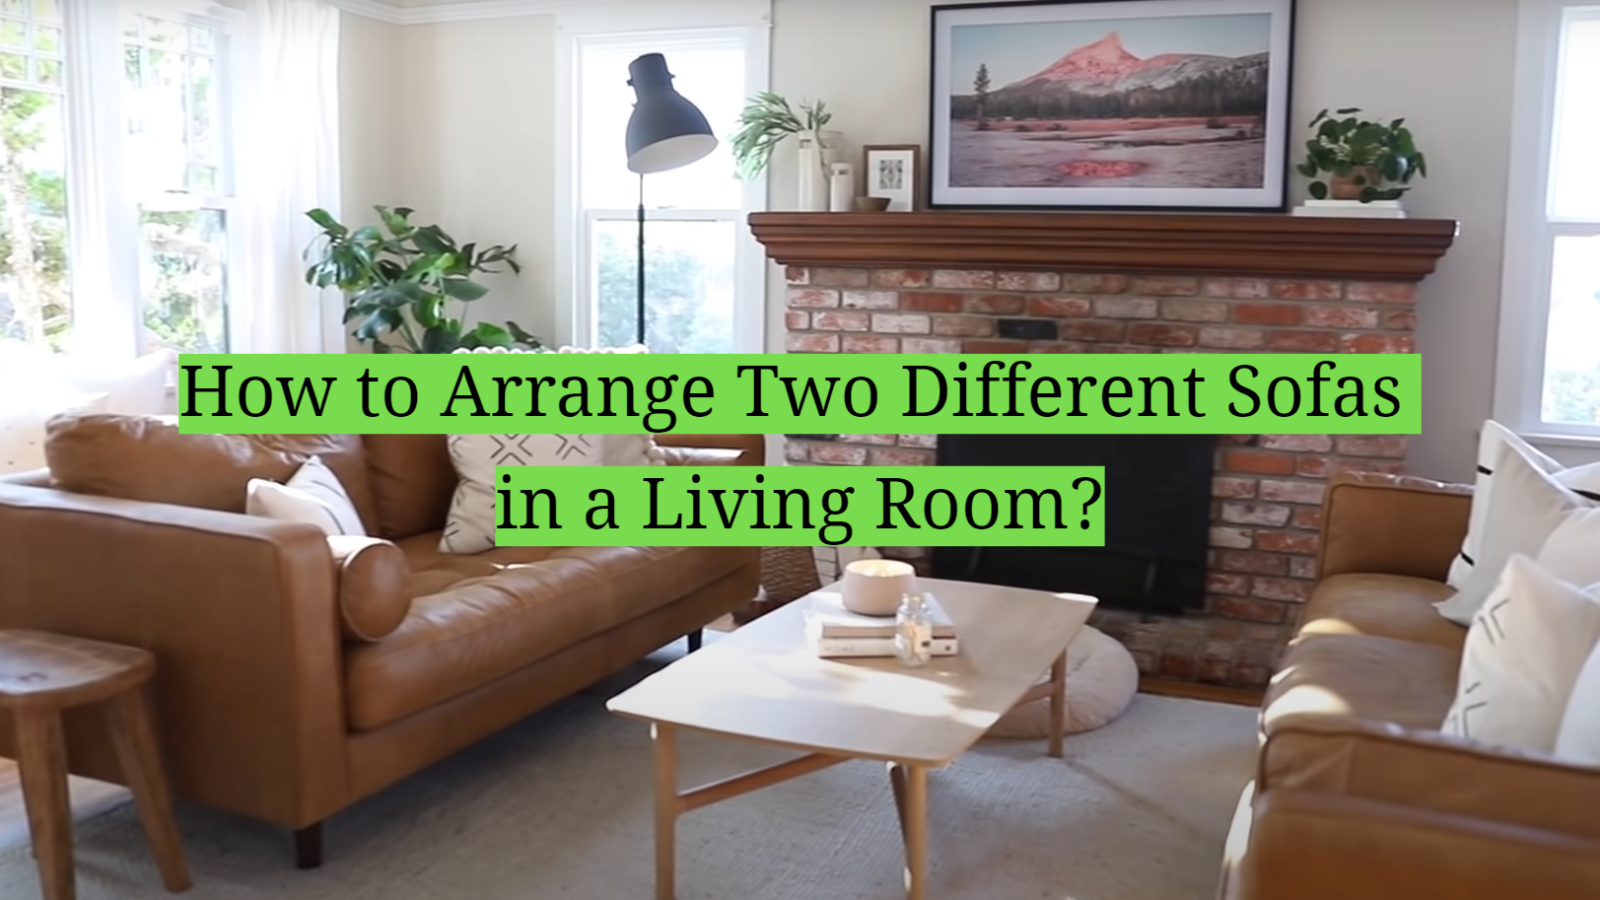 How to Arrange Two Different Sofas in a Living Room?